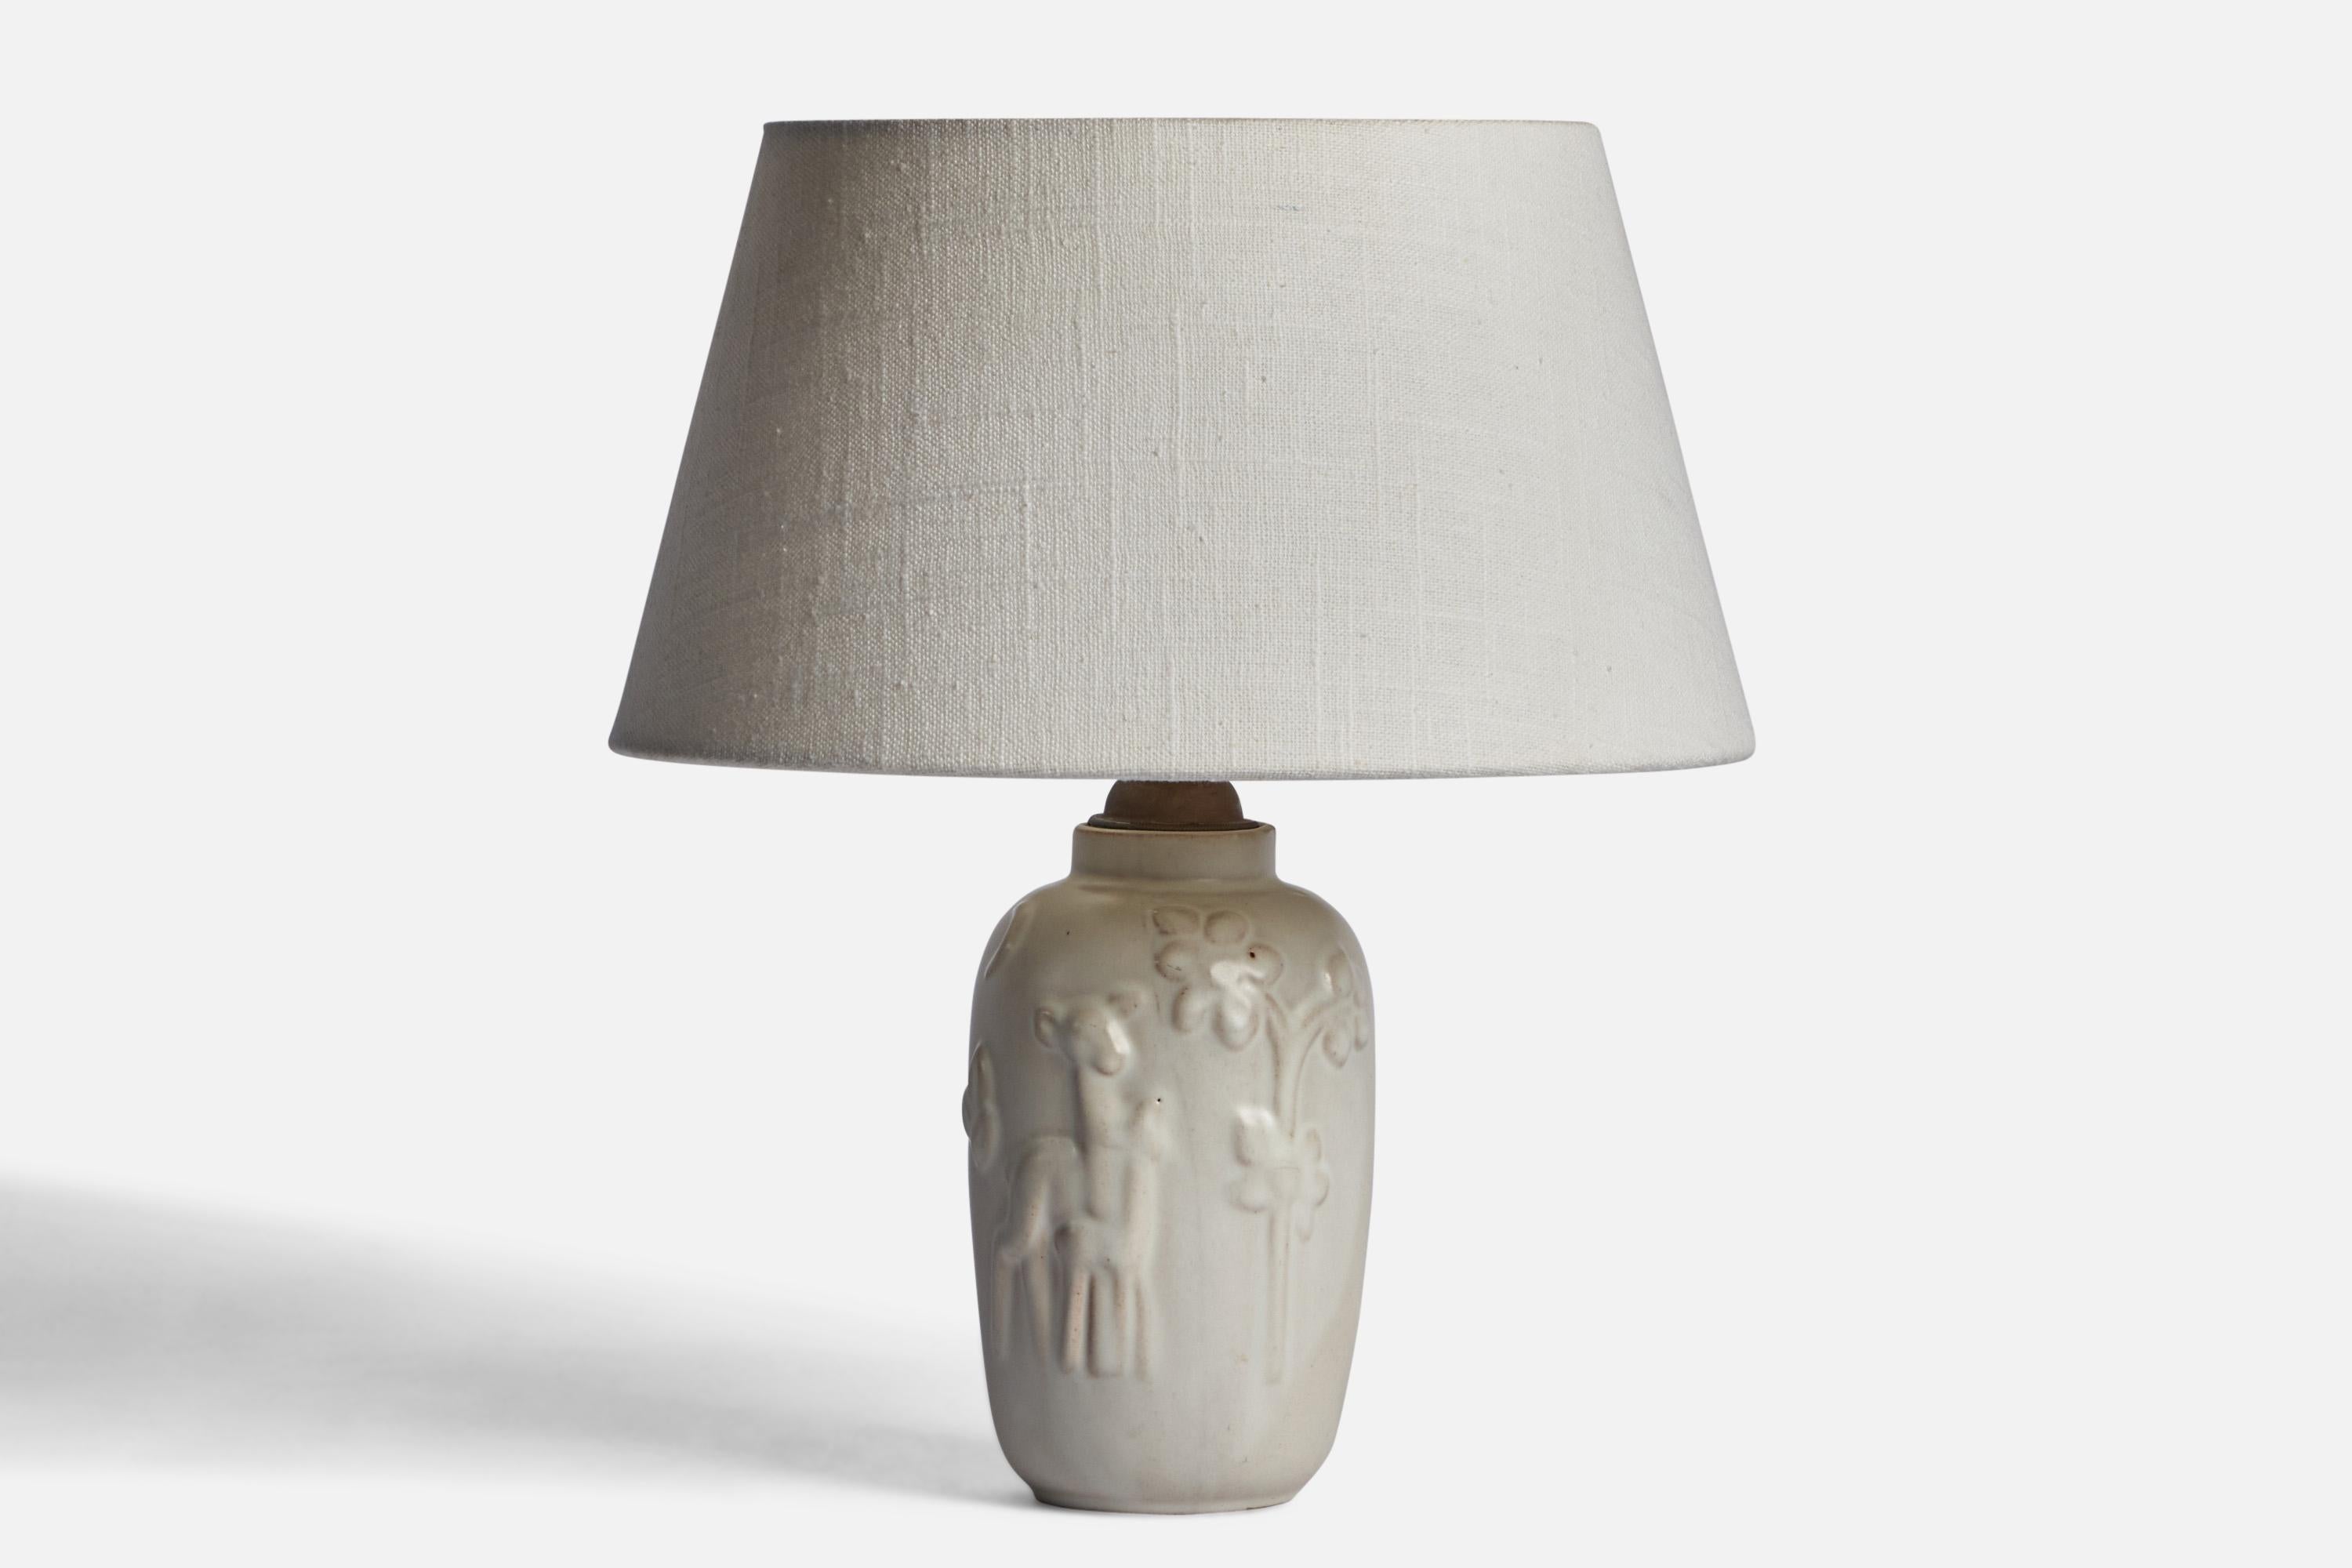 A light grey-glazed earthenware table lamp designed and produced in Sweden, 1930s.

Dimensions of Lamp (inches): 9” H x 3.75” Diameter
Dimensions of Shade (inches): 7” Top Diameter x 10” Bottom Diameter x 5.5” H 
Dimensions of Lamp with Shade